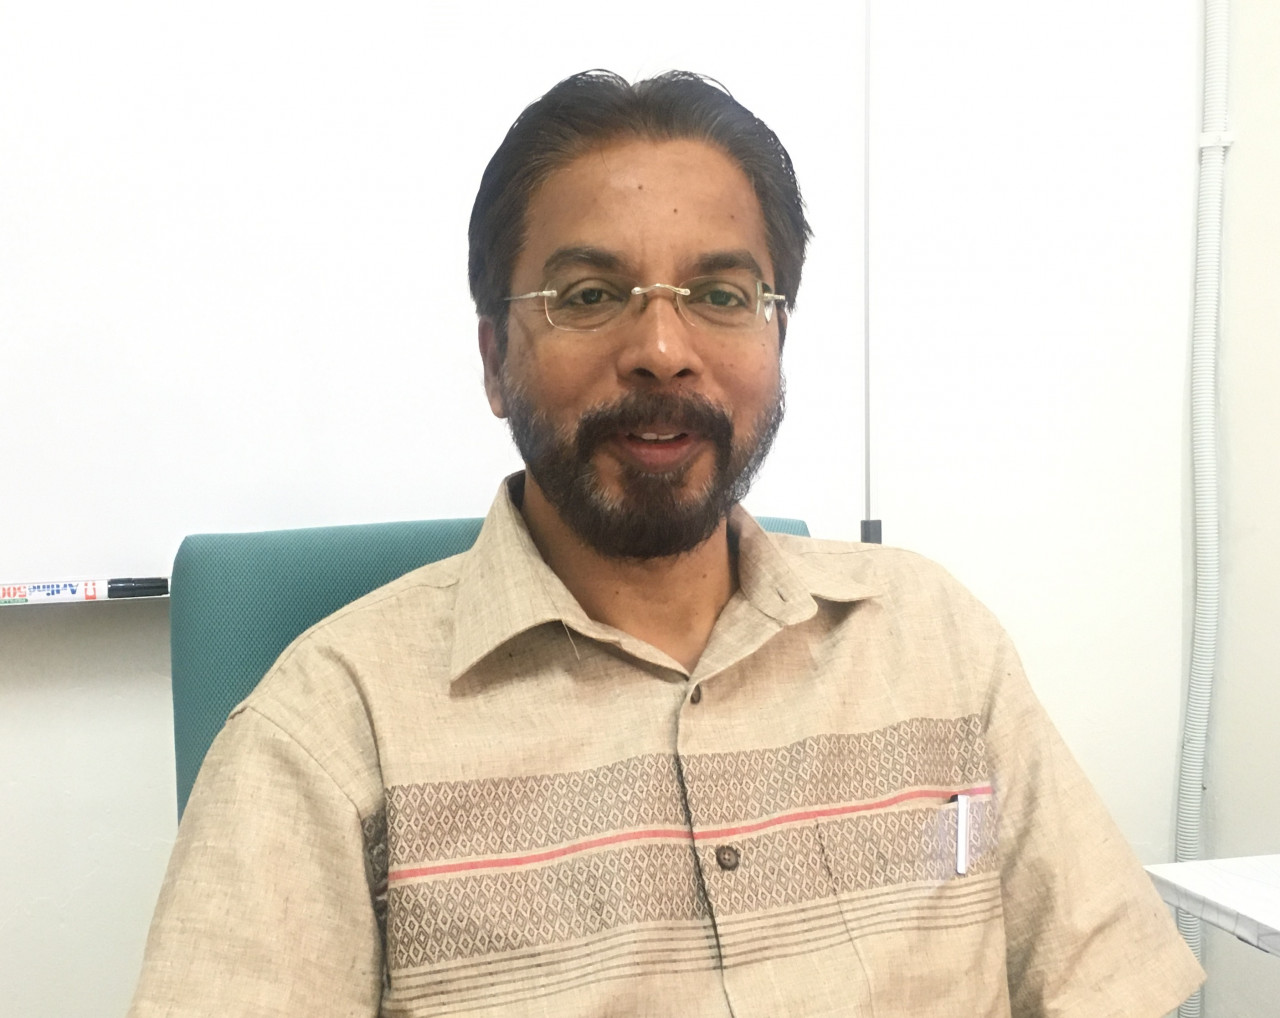 Prof Dr Gunasegaran Karuppannan says SPM students are ill-prepared to face the exams this year, especially weaker students who may have have been sidelined due to the nature of online classes. – File pic, January 19, 2021